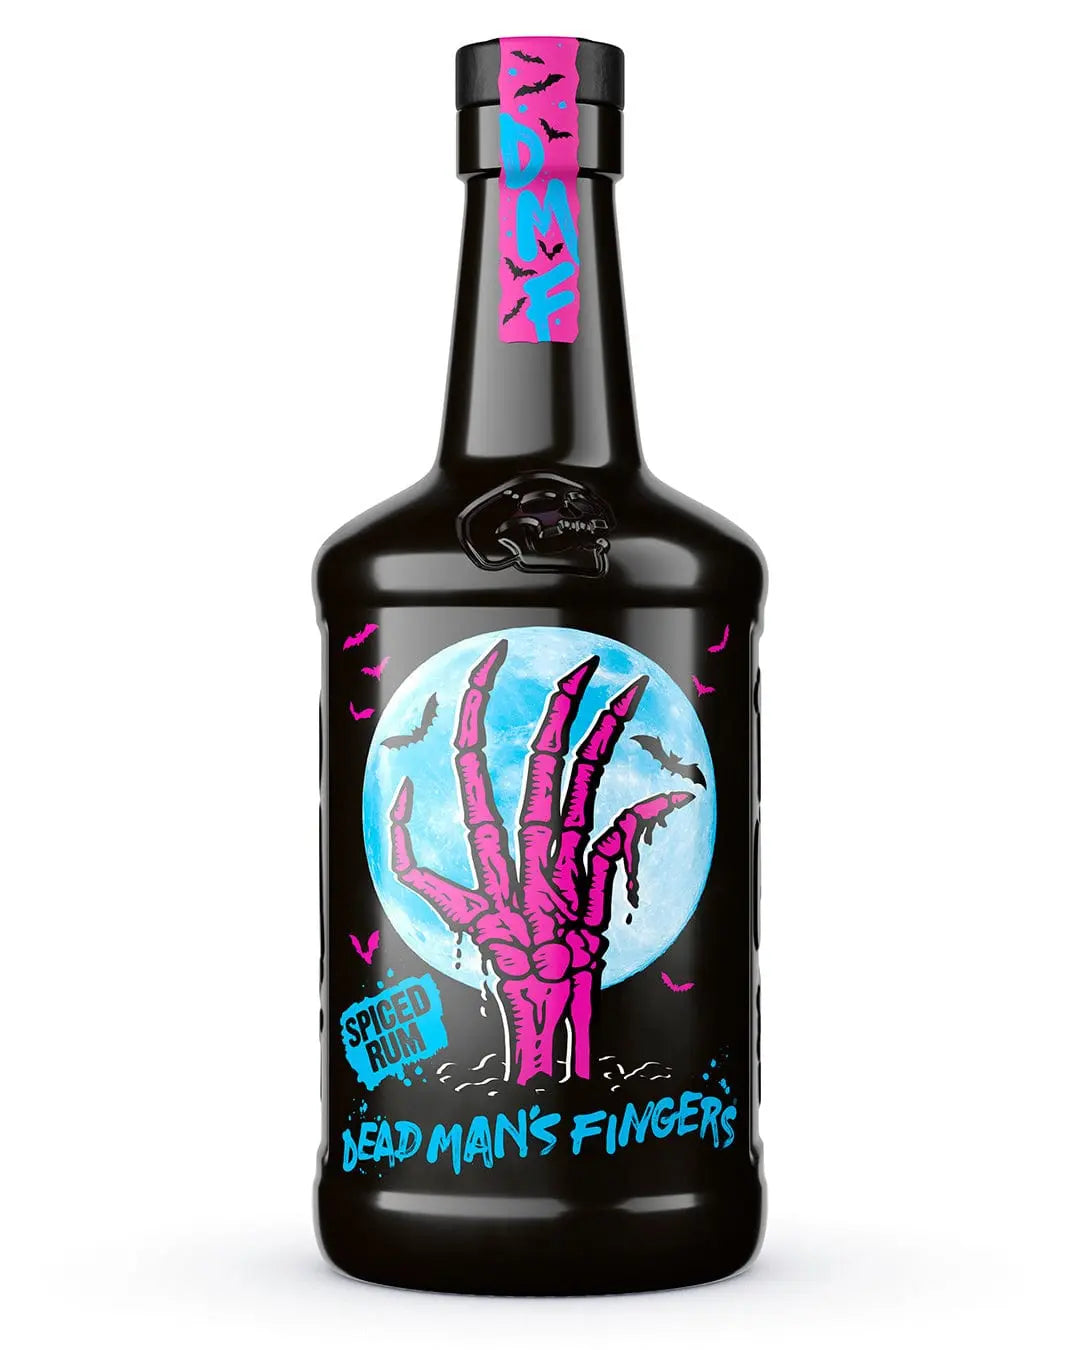 Dead Man's Fingers Limited Edition Halloween Spiced Rum, 70 cl Rum